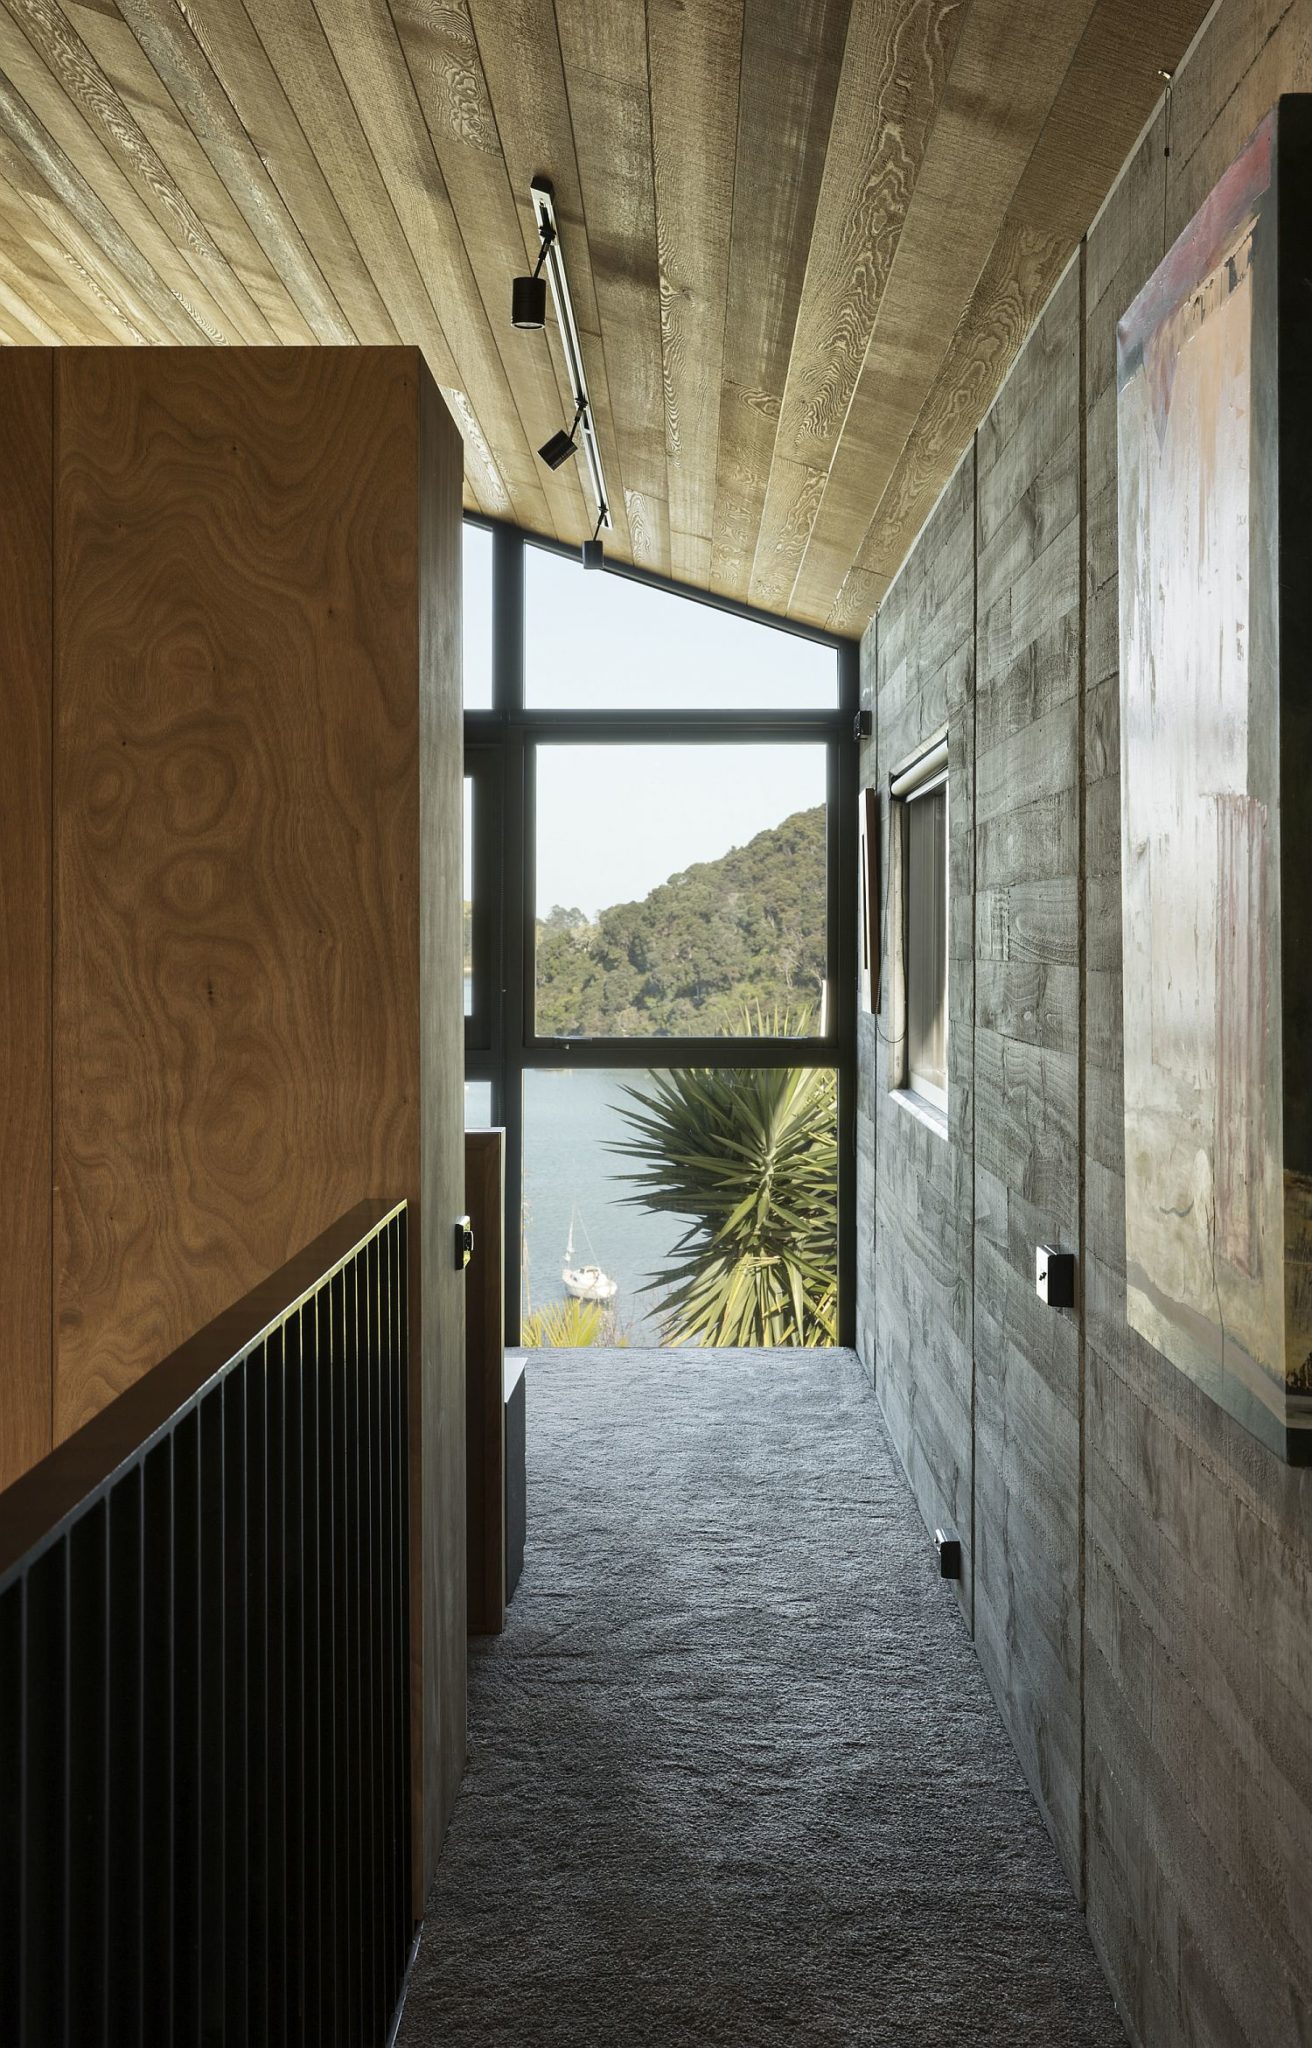 Precast concrete blocks combined with wooden ceiling give the interior ample textural contrast